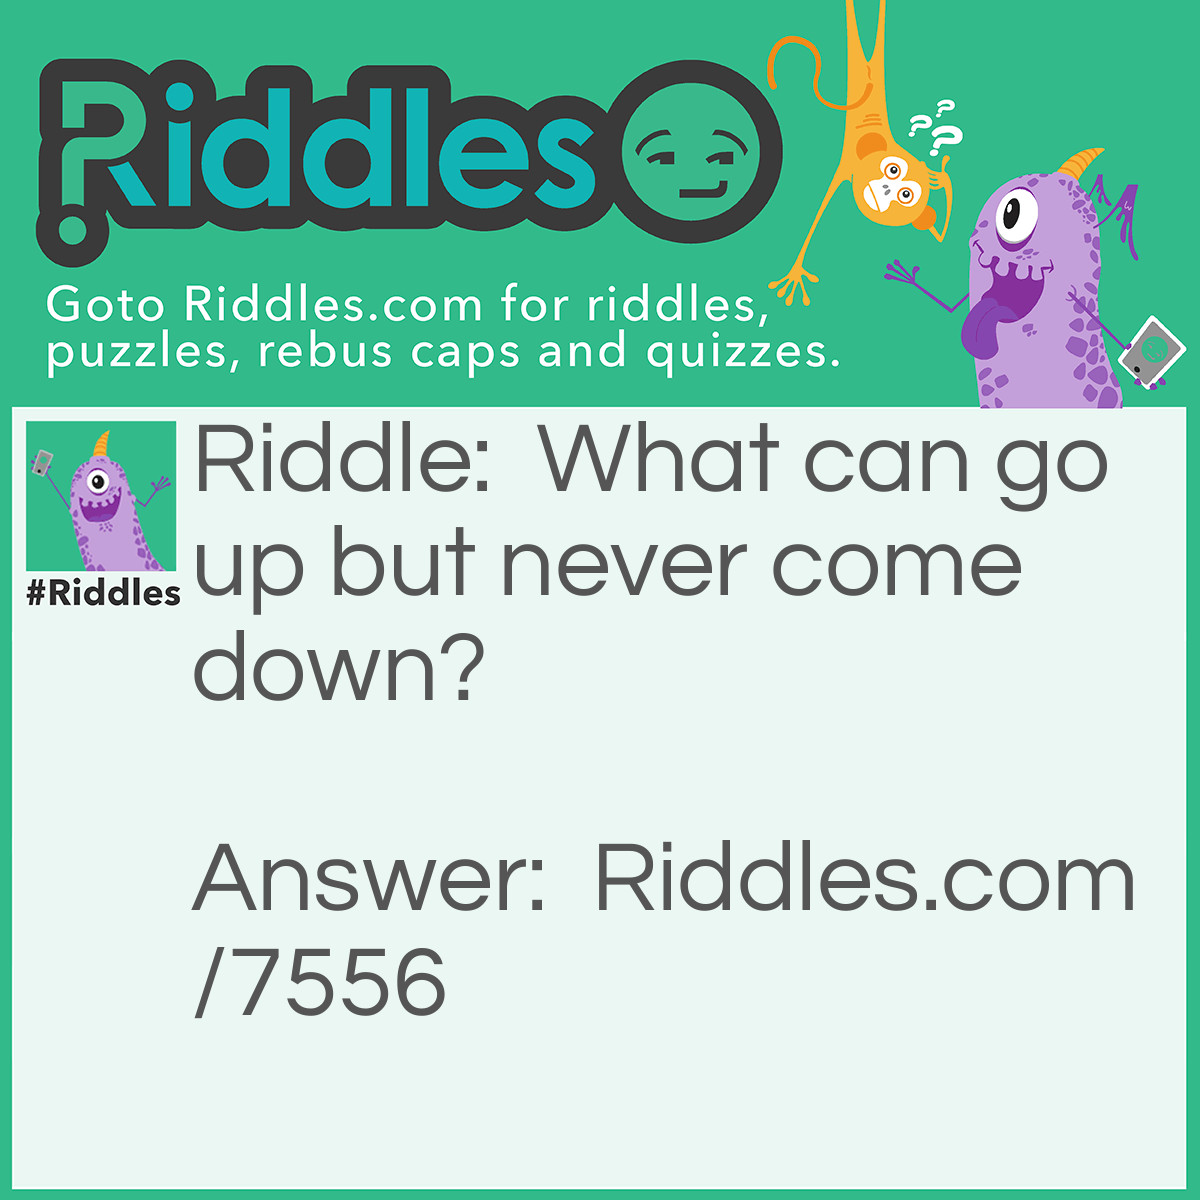 Riddle: What can go up but never come down? Answer: Your age